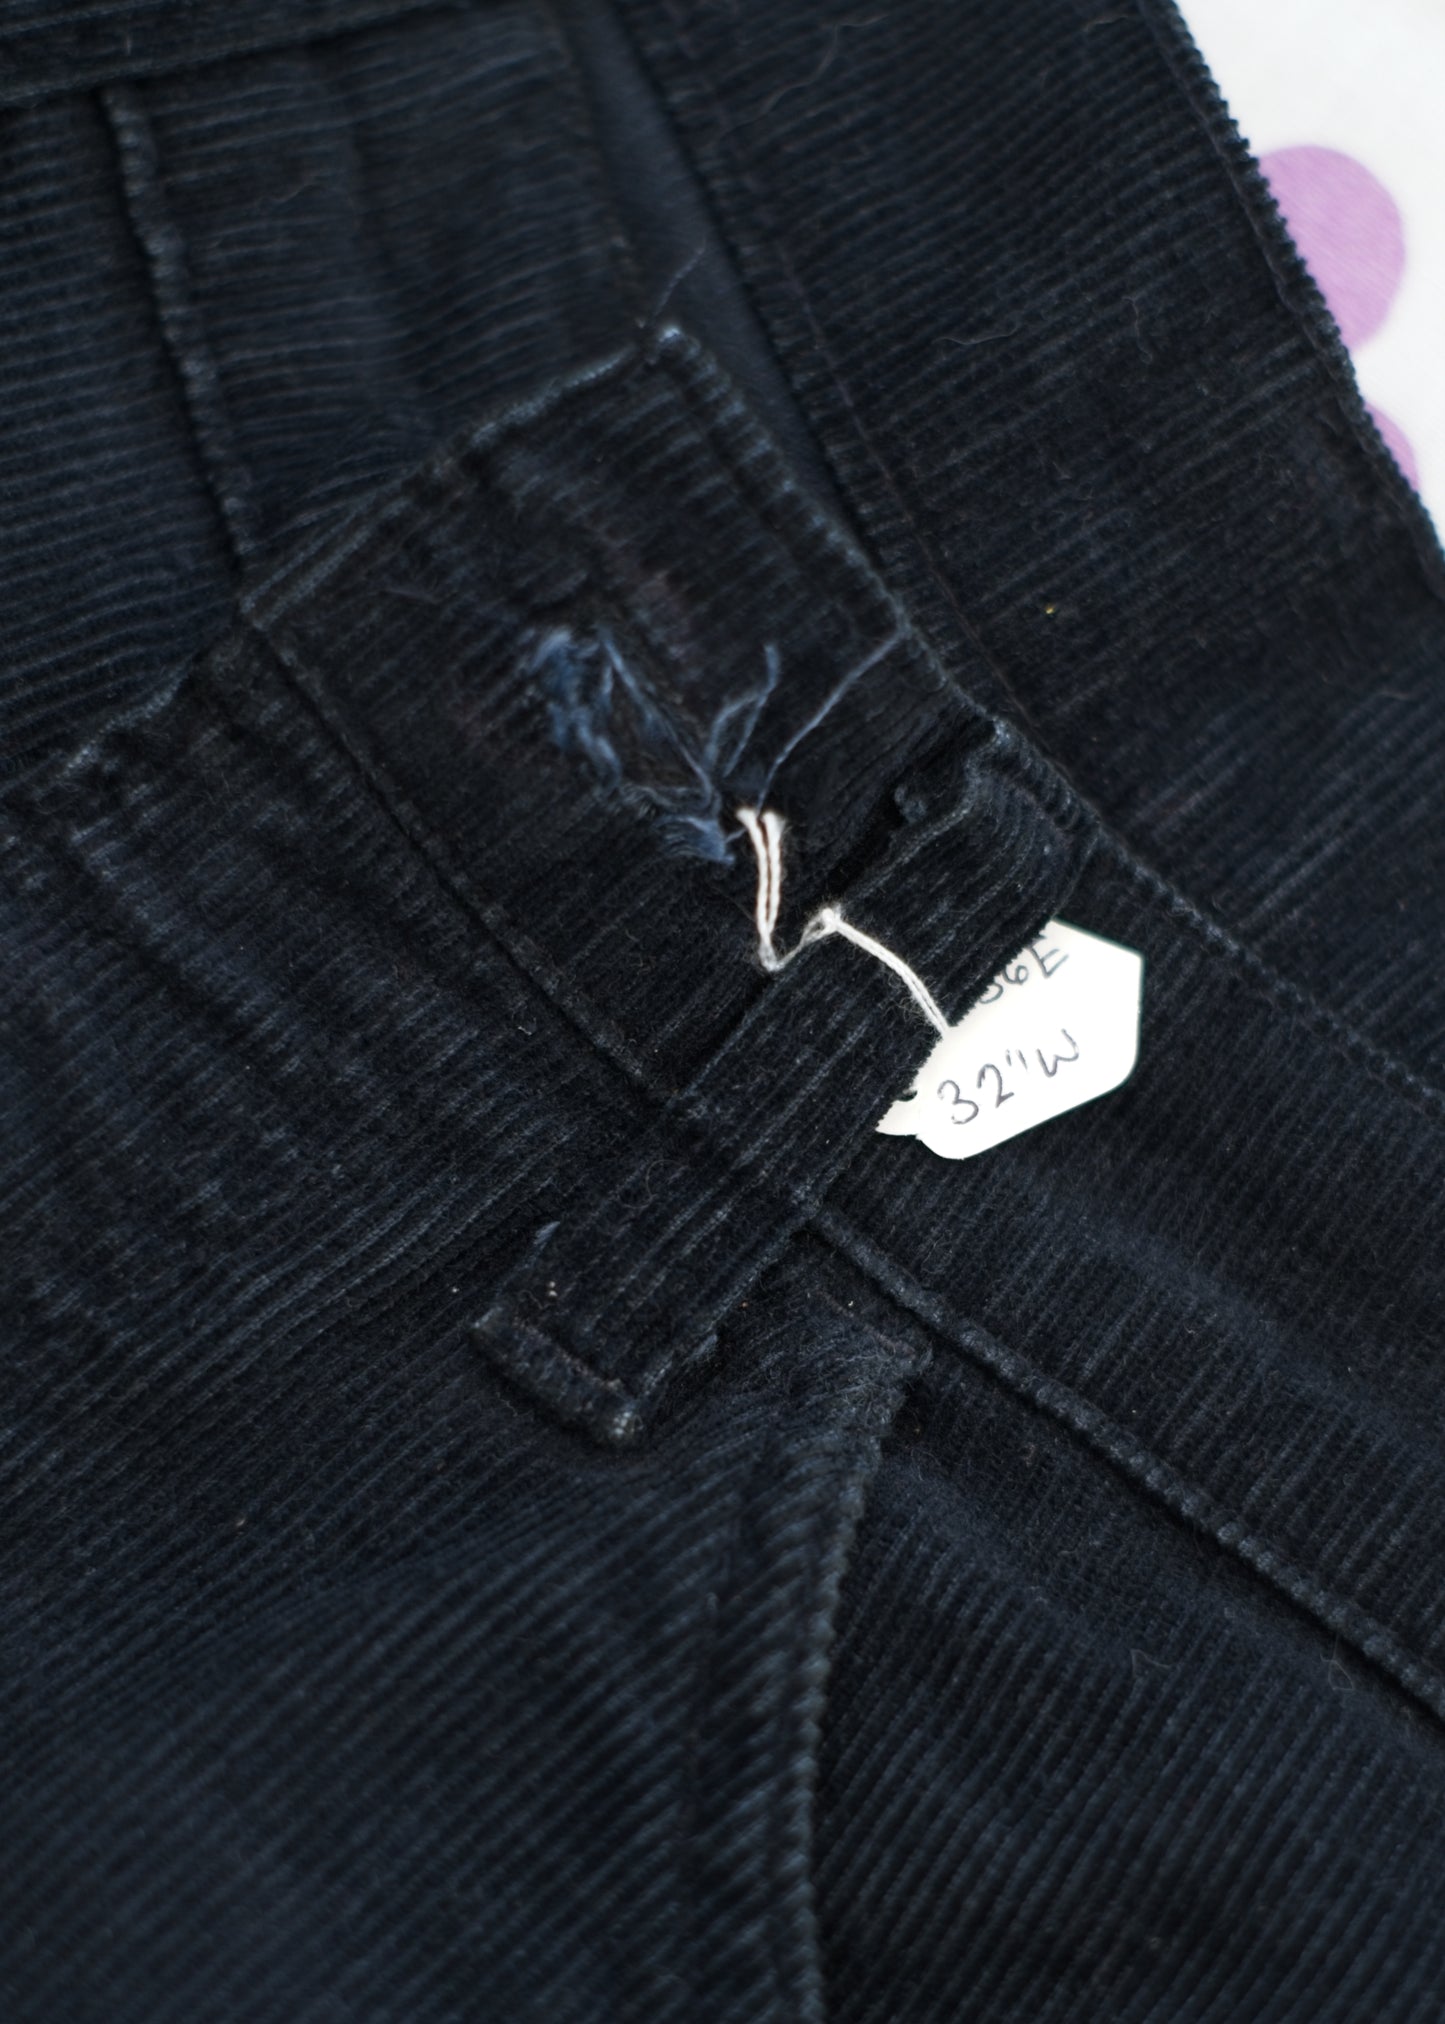 1970s Black Levis Corduroy Flared Jeans • White Tab